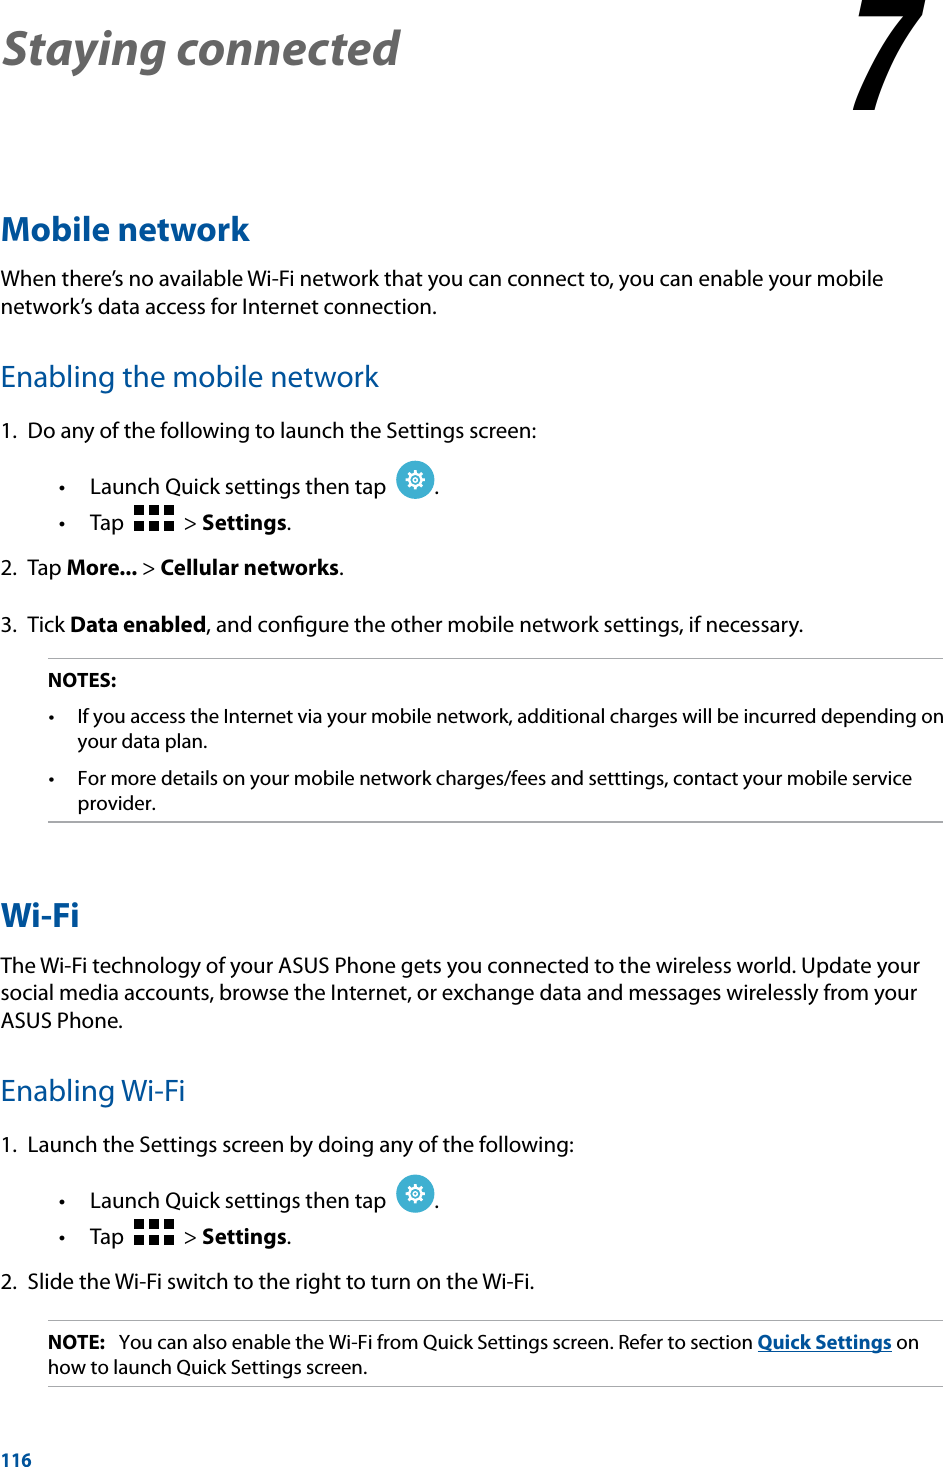 116Staying connected 77  Staying connectedMobile networkWhen there’s no available Wi-Fi network that you can connect to, you can enable your mobile network’s data access for Internet connection.Enabling the mobile network1.  Do any of the following to launch the Settings screen: Launch Quick settings then tap   .   Tap     &gt; Settings.2. Tap More... &gt; Cellular networks.3. Tick Data enabled, and conﬁgure the other mobile network settings, if necessary.NOTES:  your data plan. provider.Wi-FiThe Wi-Fi technology of your ASUS Phone gets you connected to the wireless world. Update your social media accounts, browse the Internet, or exchange data and messages wirelessly from your ASUS Phone.Enabling Wi-Fi1.  Launch the Settings screen by doing any of the following: Launch Quick settings then tap   .   Tap     &gt; Settings.2.  Slide the Wi-Fi switch to the right to turn on the Wi-Fi.NOTE:   You can also enable the Wi-Fi from Quick Settings screen. Refer to section Quick Settings on how to launch Quick Settings screen.